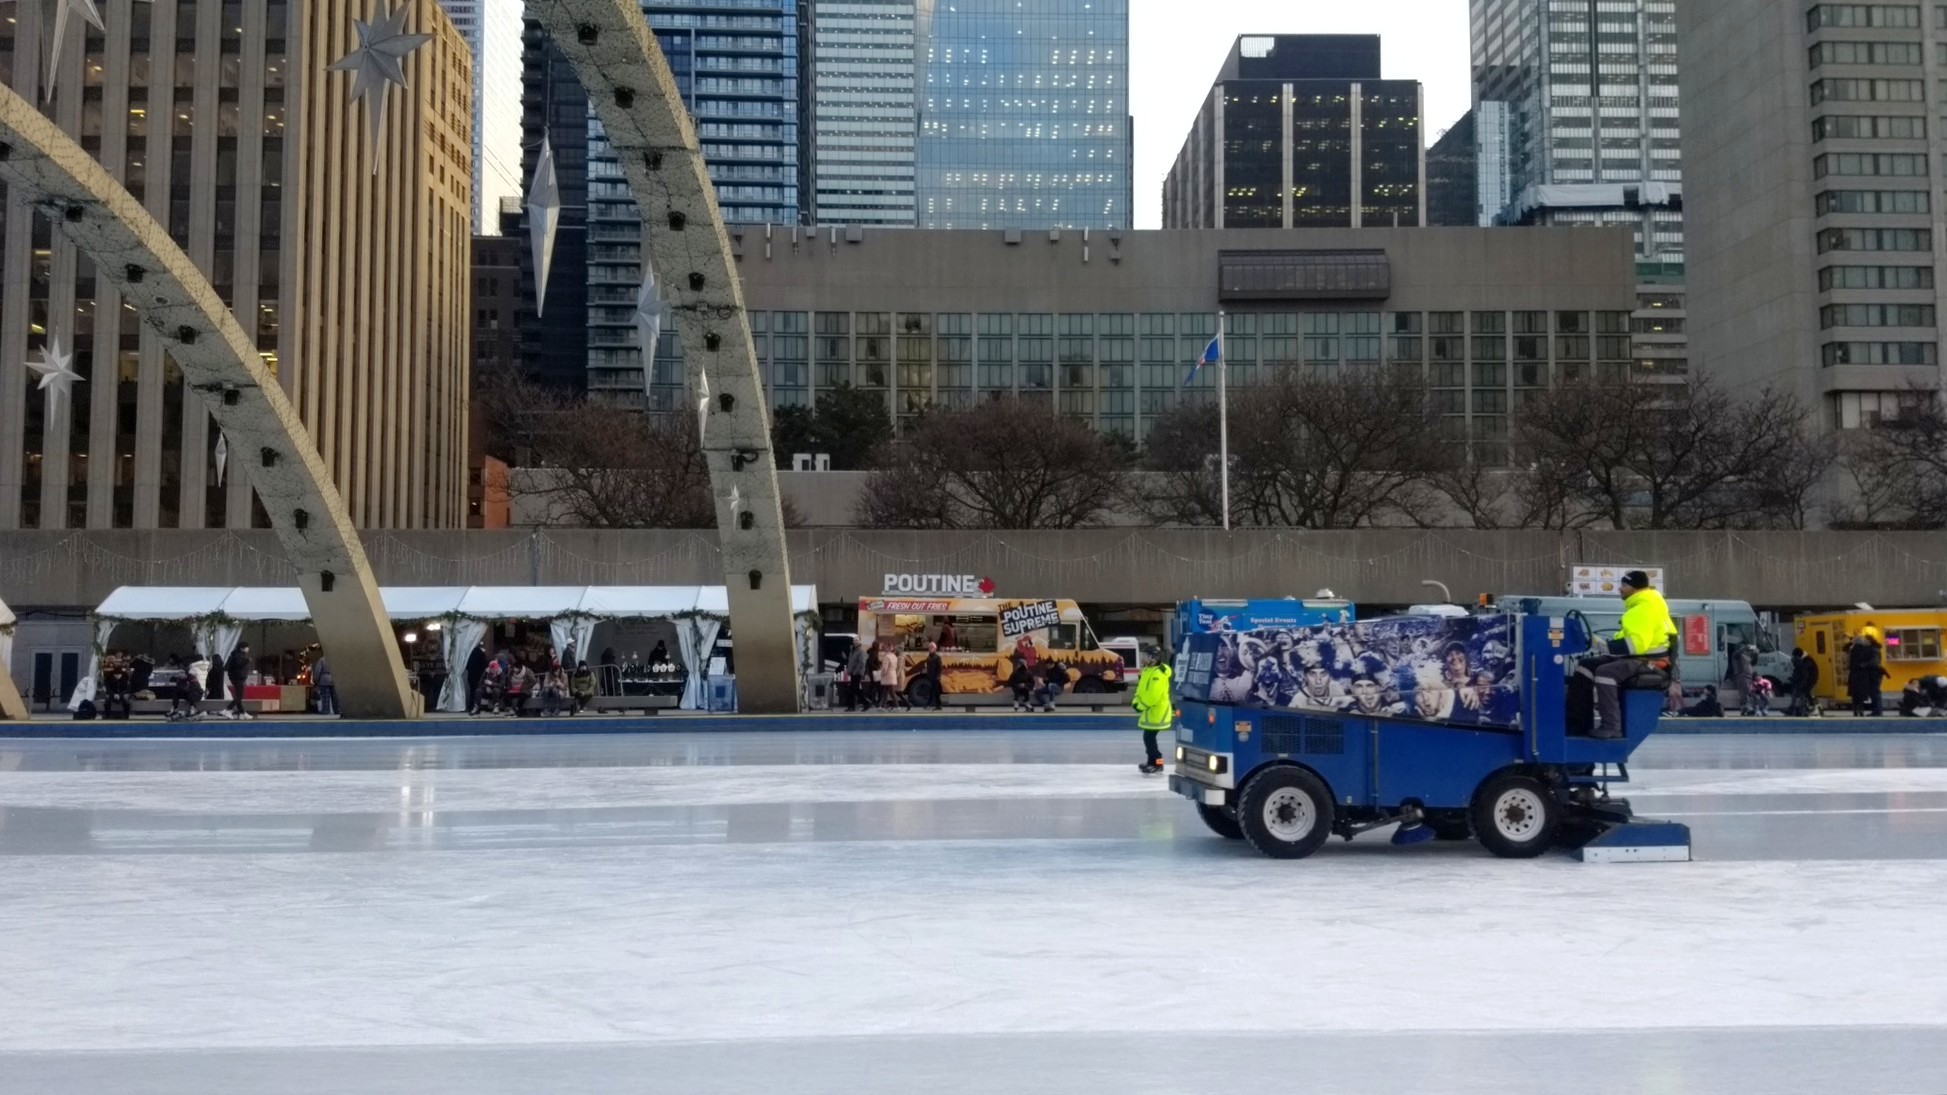 At the Nathan Phillips Square skating rink, a zamboni slowly rolls by with a poutine truck in the background.